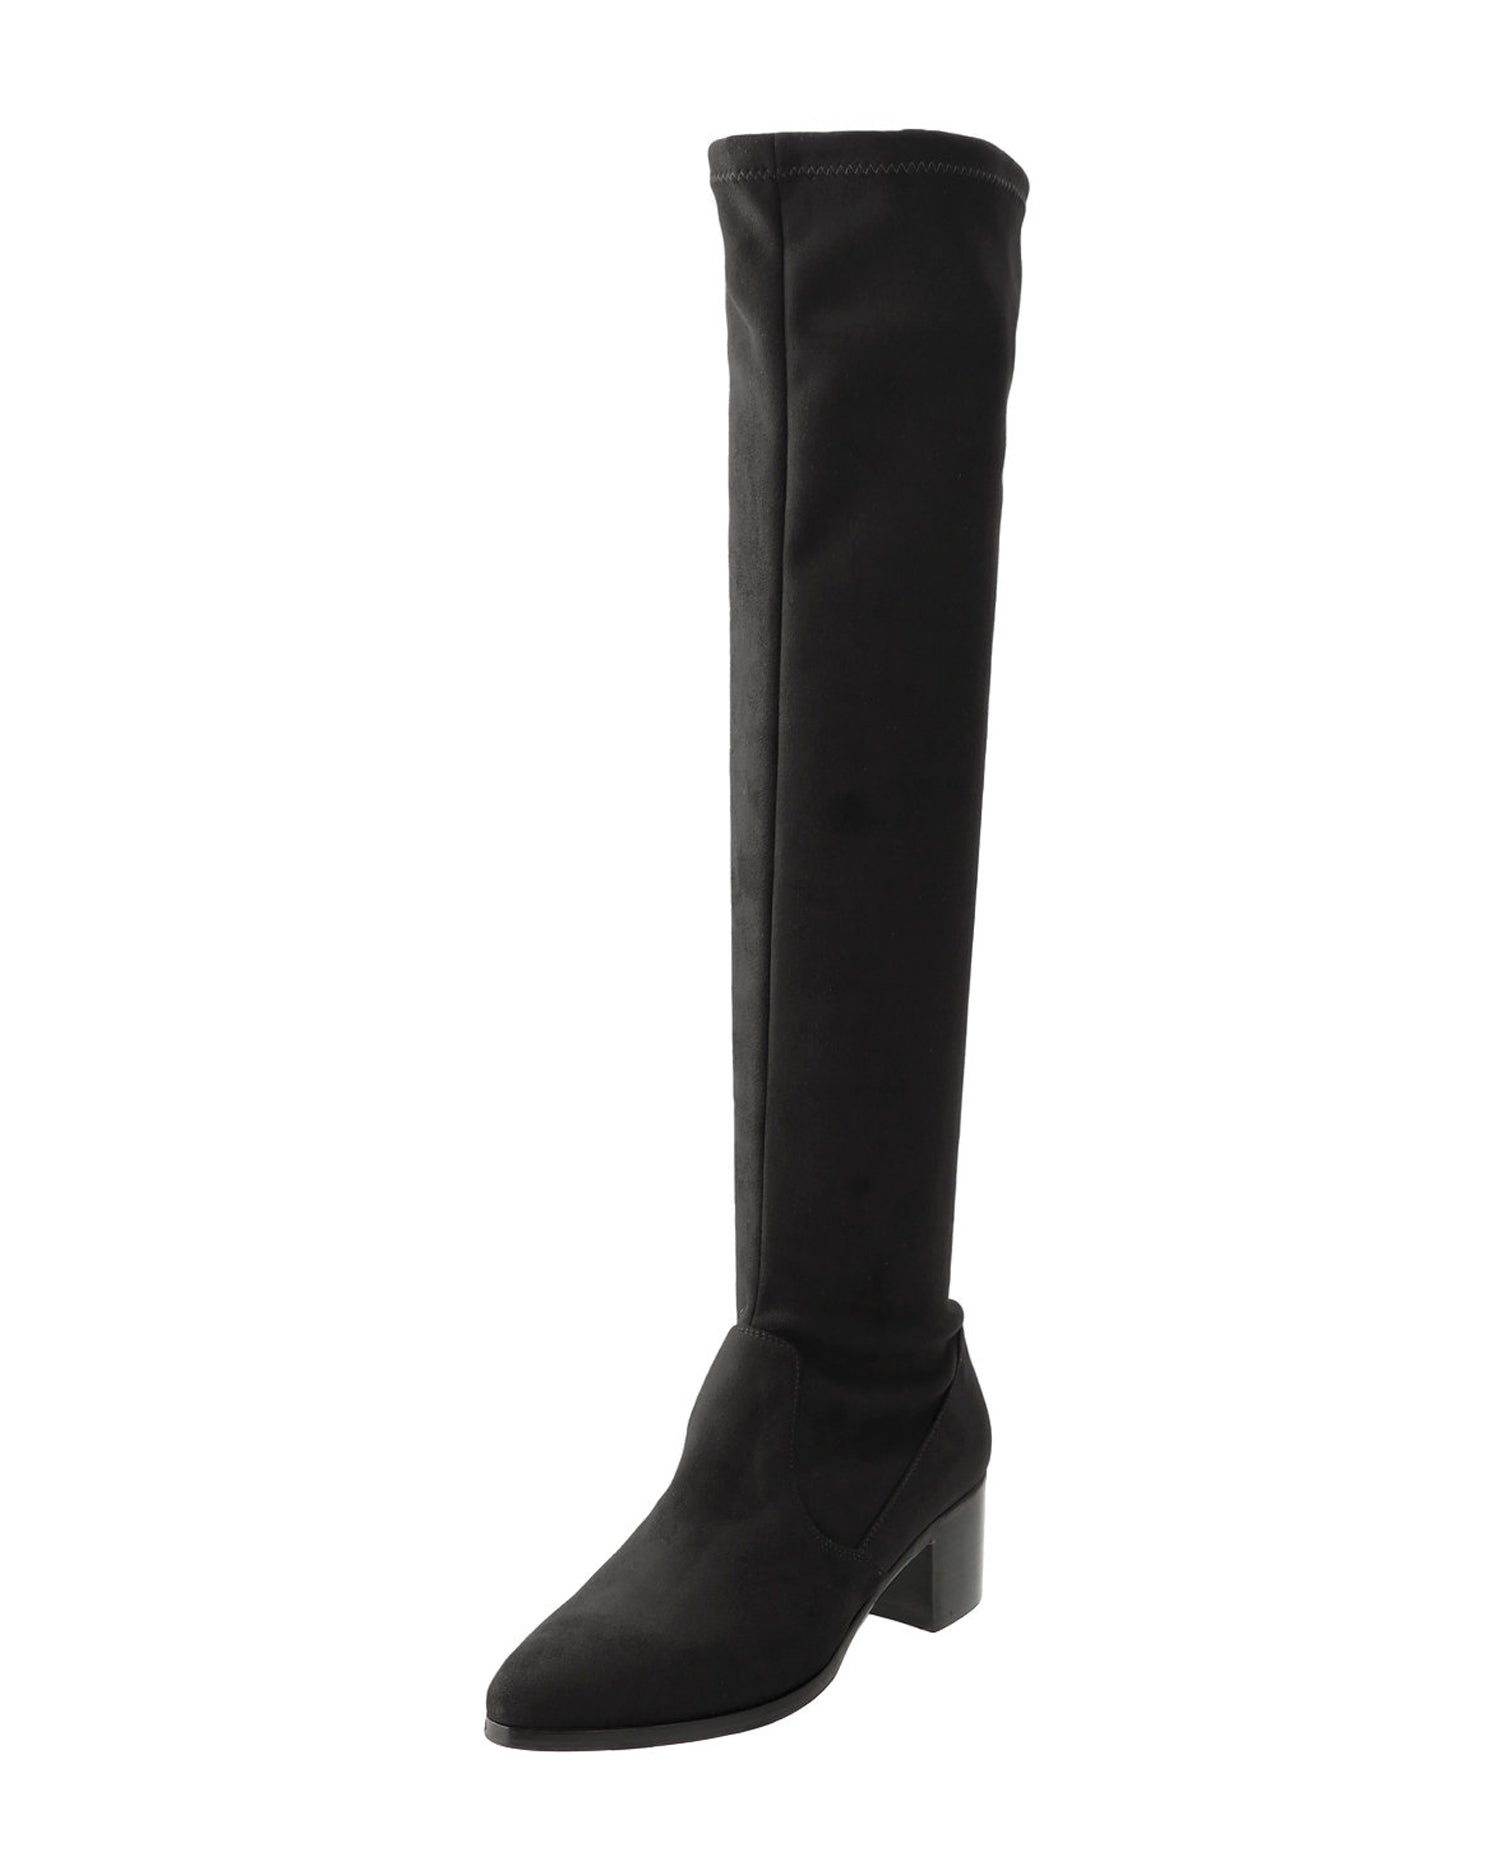 FABIO RUSCONI for AMARC stretch knee high boots – AMARC LIFE STORE